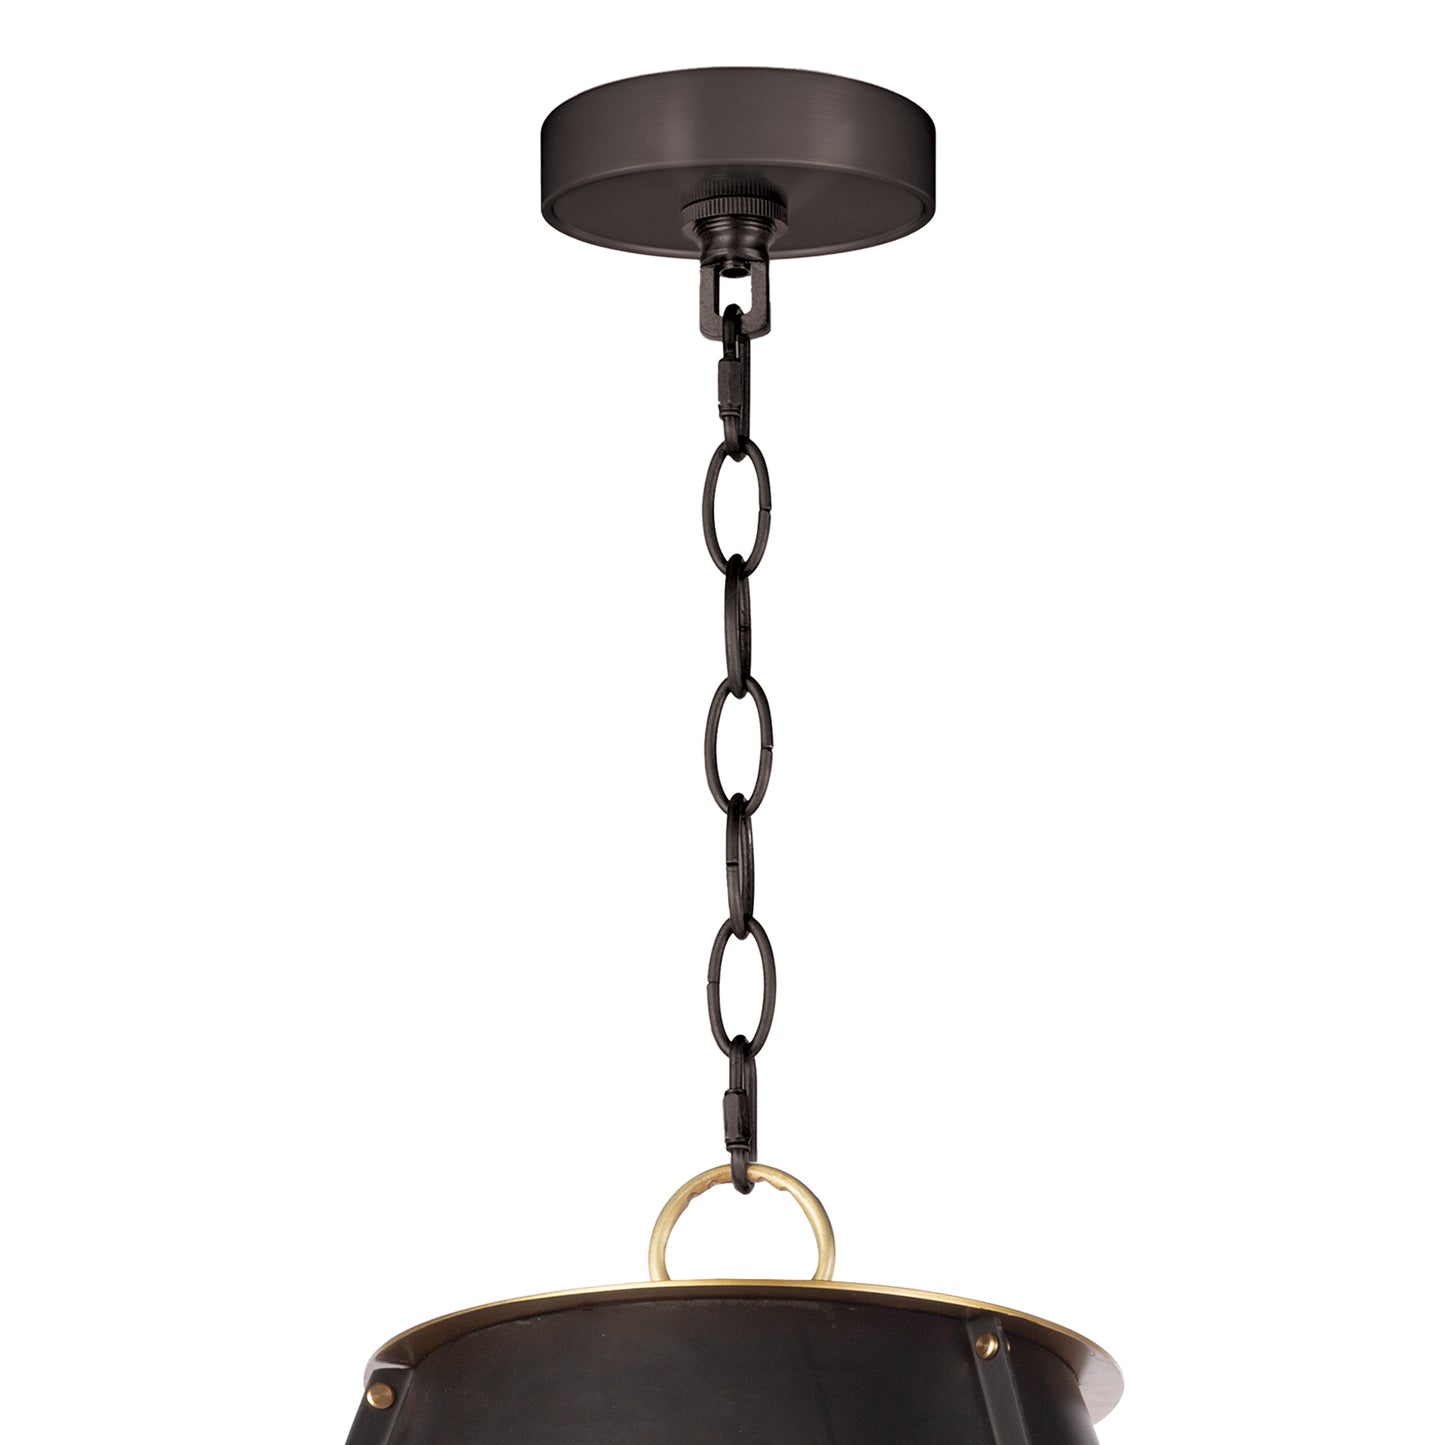 Regina Andrew French Maid Chandelier Large in Black